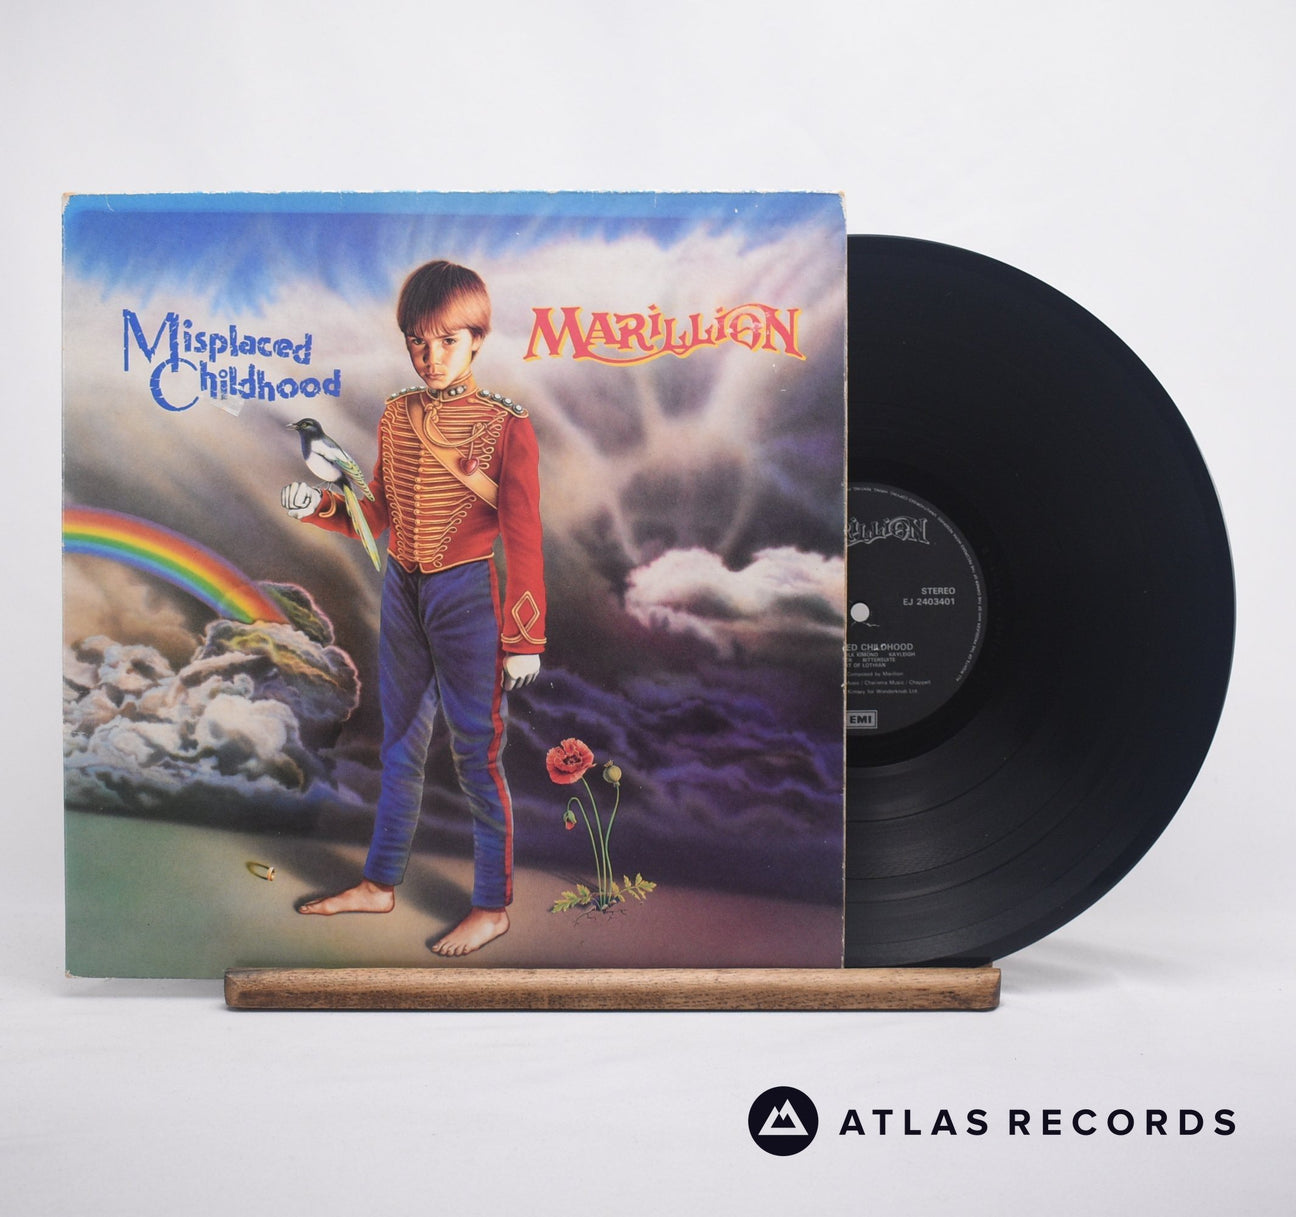 Marillion Misplaced Childhood LP Vinyl Record - Front Cover & Record